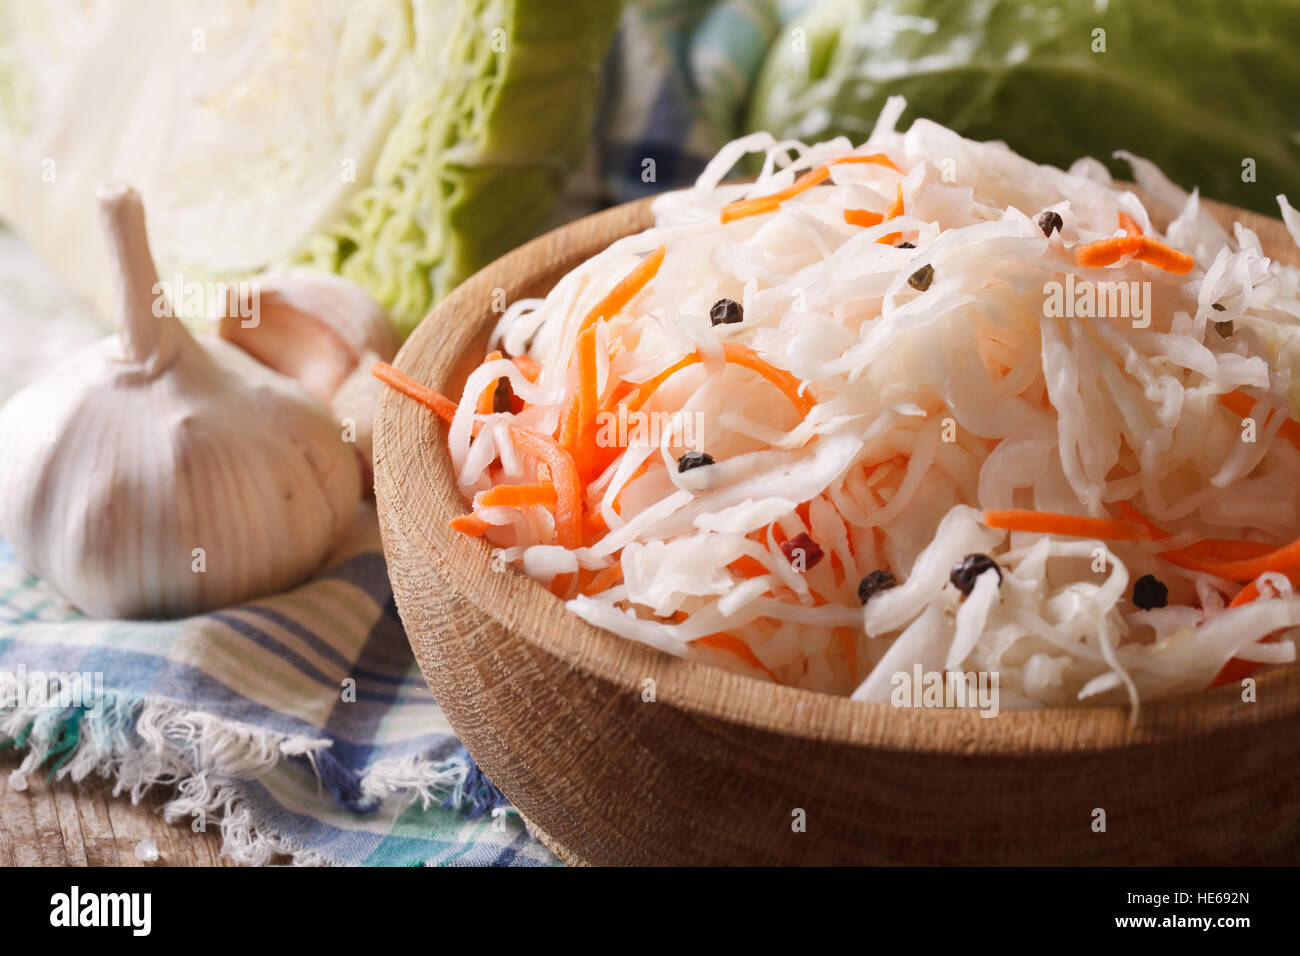 homemade sauerkraut with carrot in a wooden plate close up horizontal Stock Photo